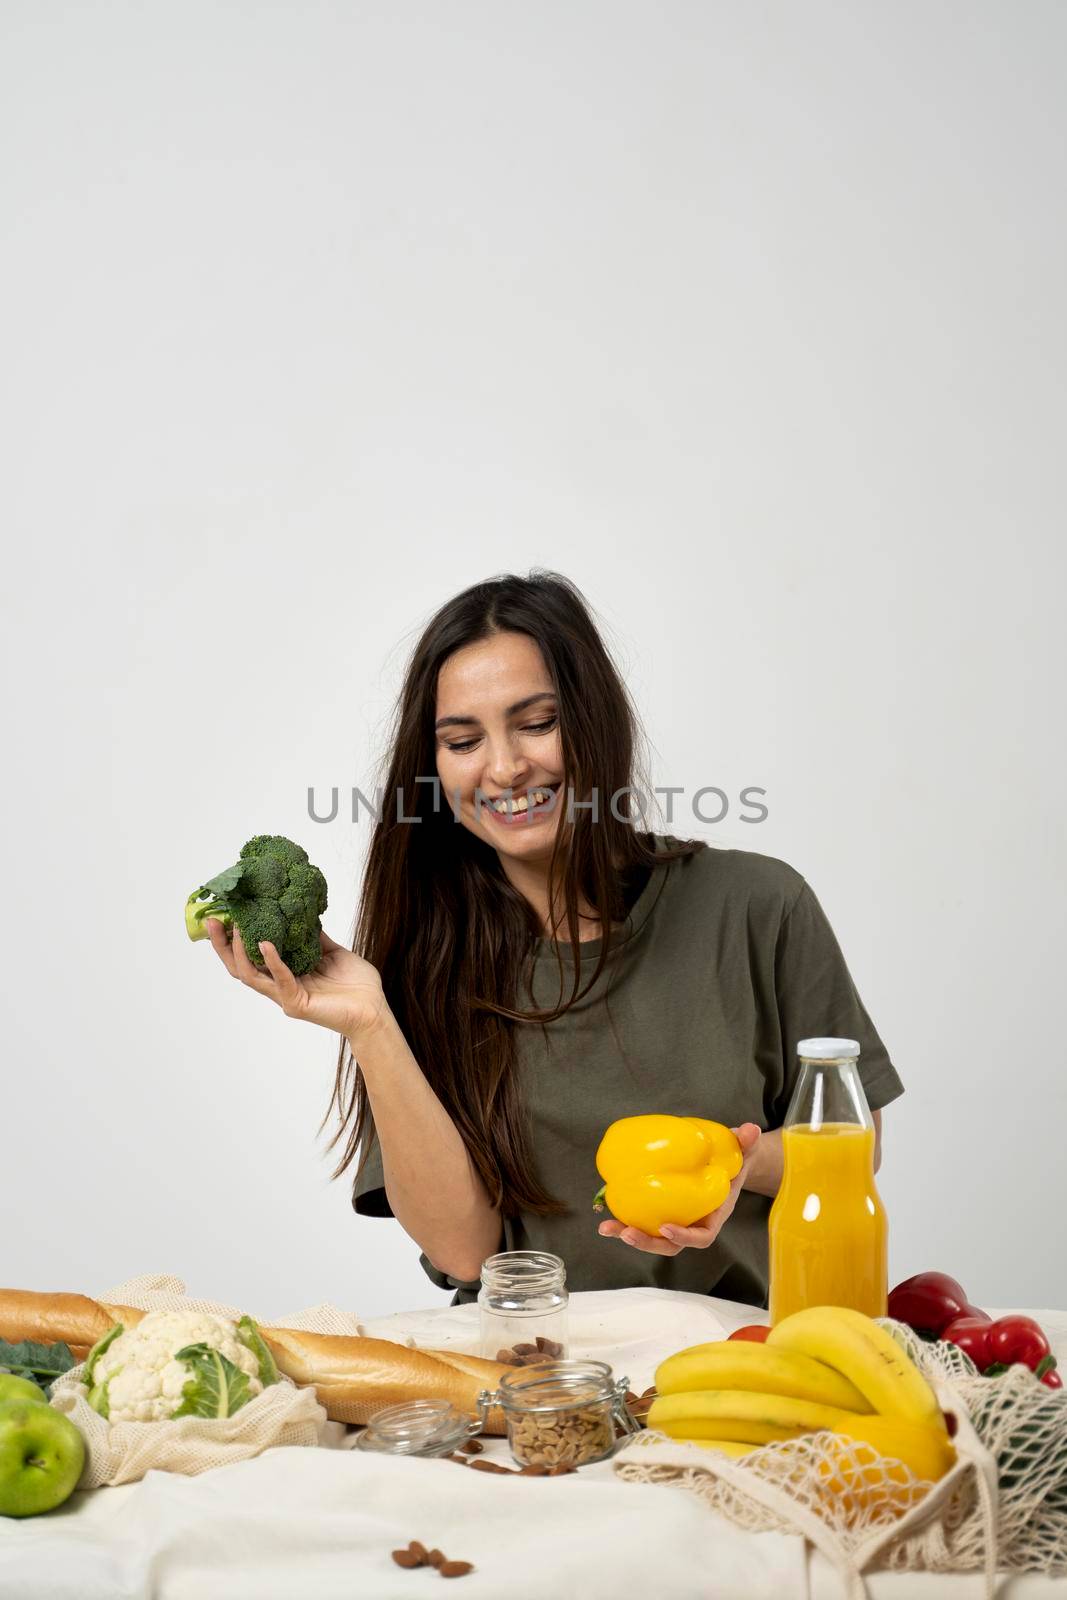 Happy woman in green t-shirt unpacking shopping mesh eco bag with healthy vegan vegetables, fruits, bread, snacks and holding broccoli and yellow pepper in a hands. Healthy eating vegetarian concept